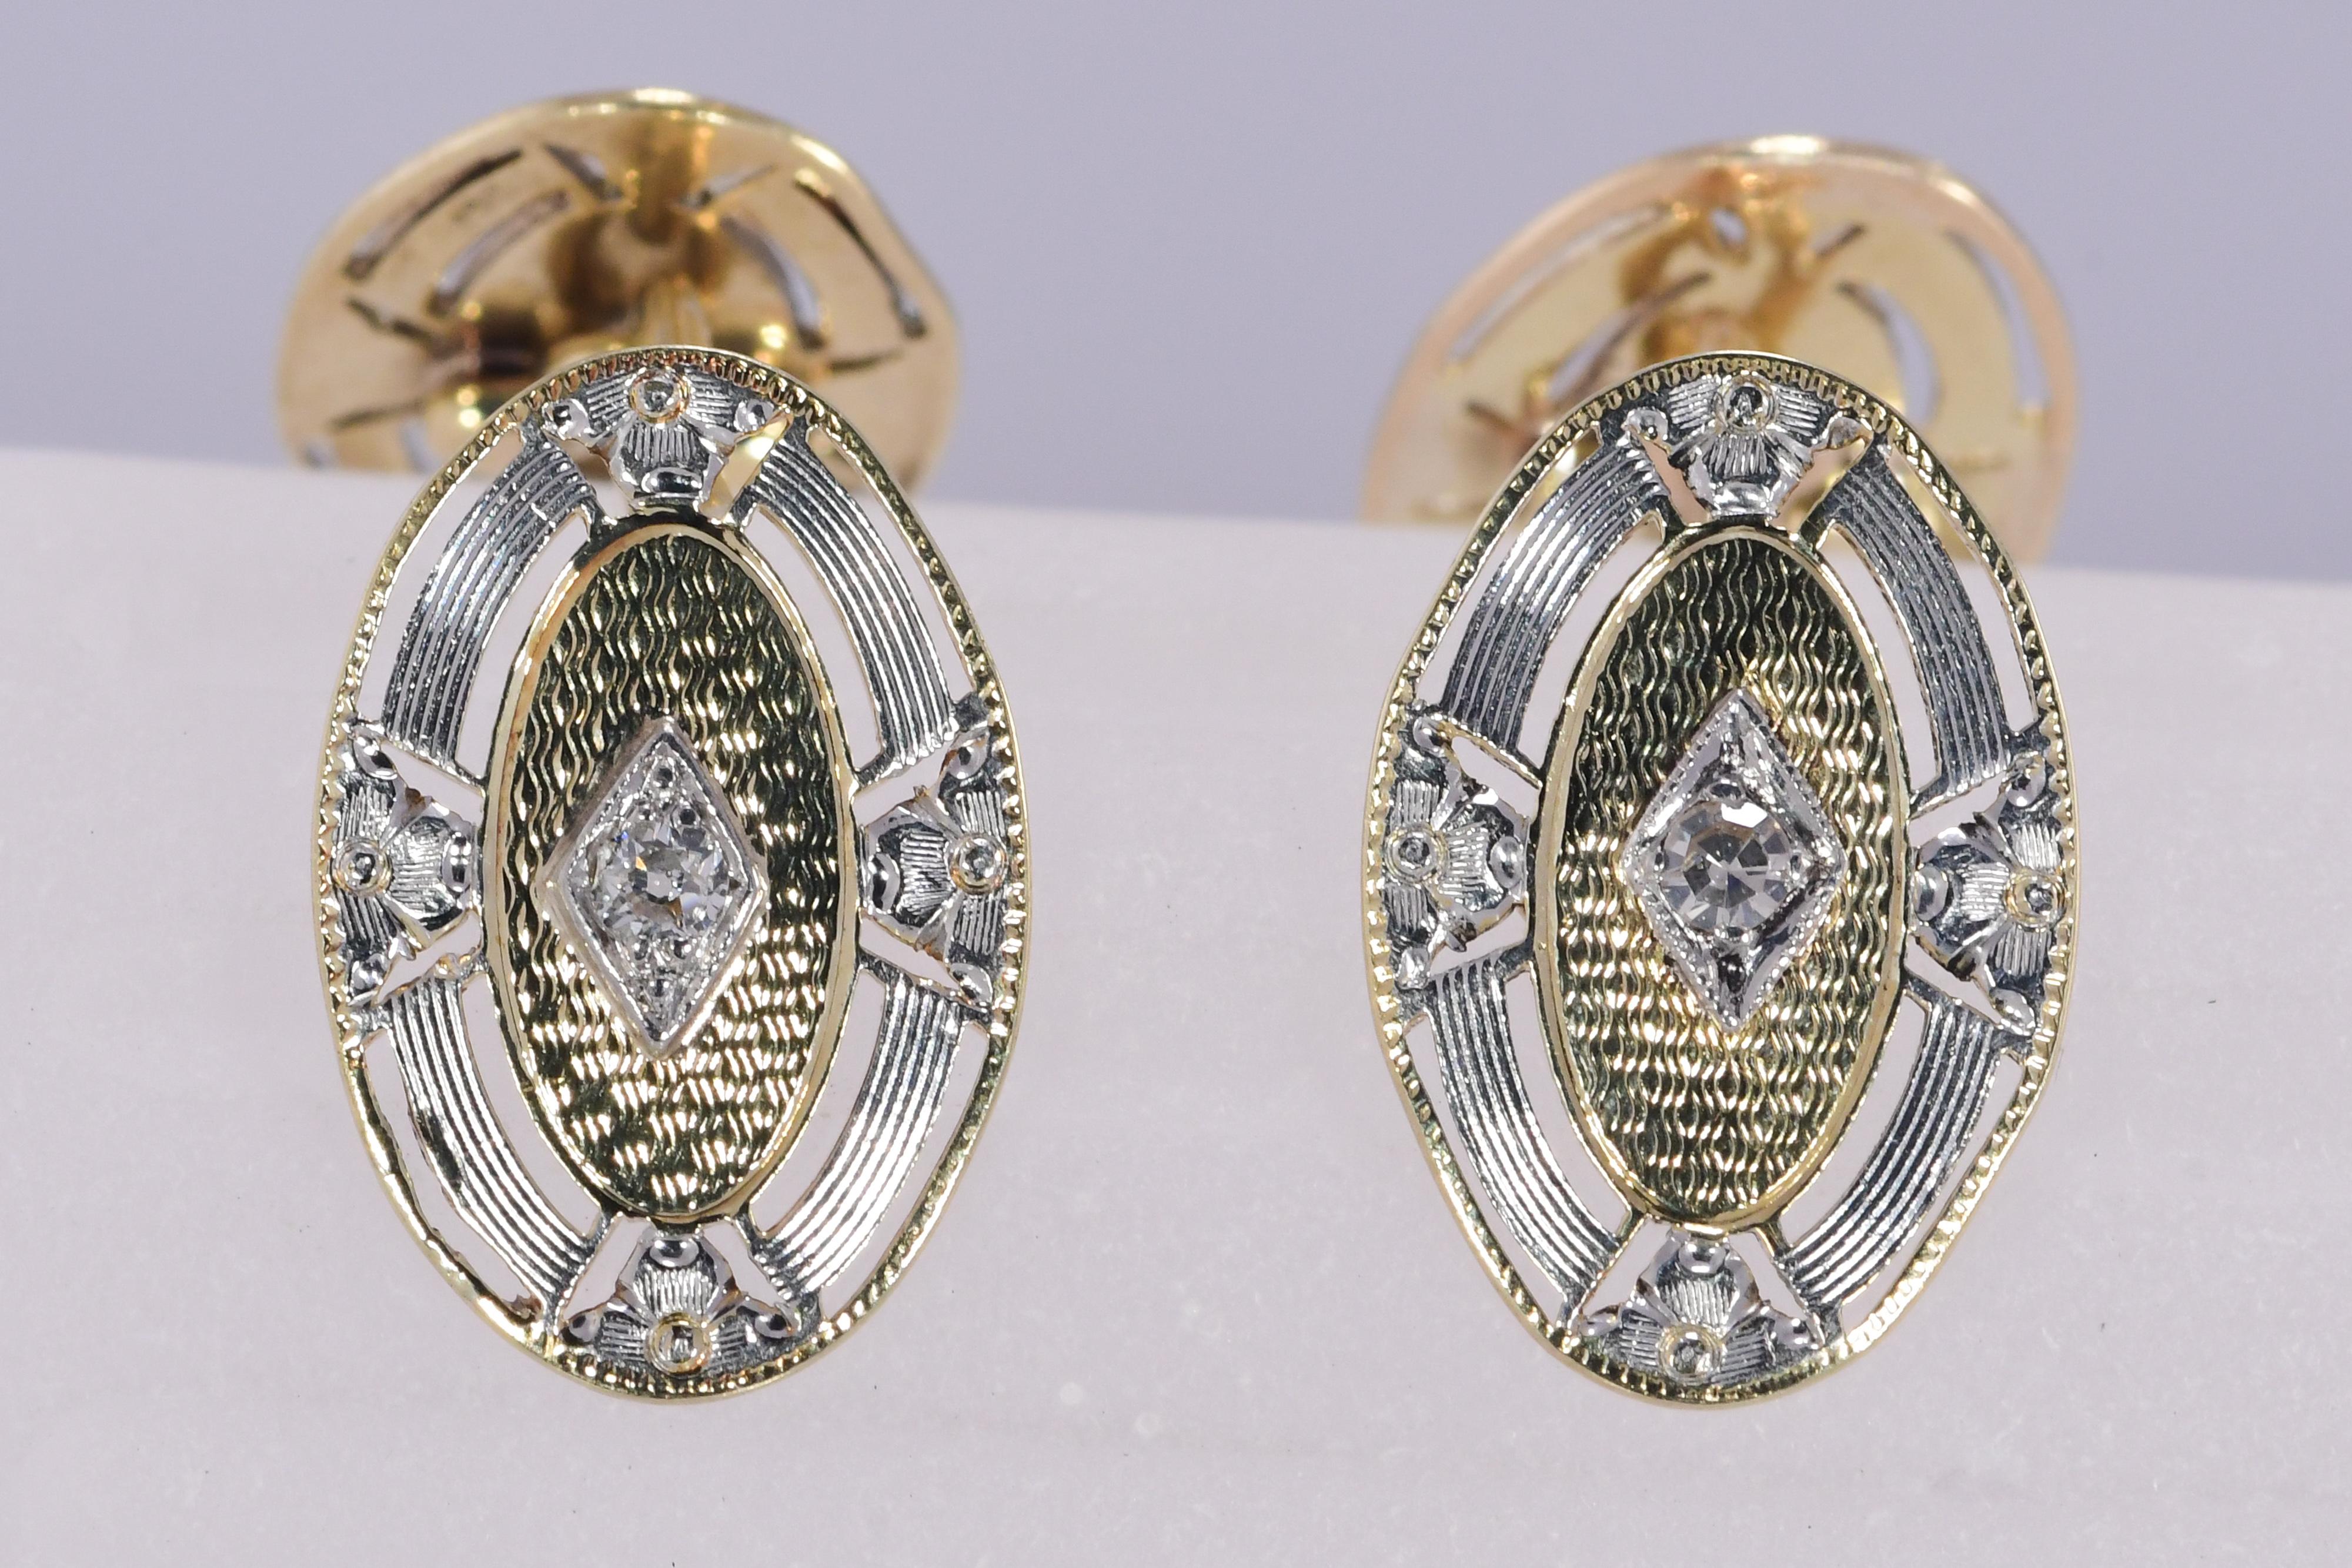 Vintage Art Deco 1920's 14 karat yellow and white gold diamond cuff links. The oval shape cuff links have detailed open work and geometric patterns. 
The length and width is 3/4 inch by 1/2 inch. The diamond weight totals .08 carat. The Weight is